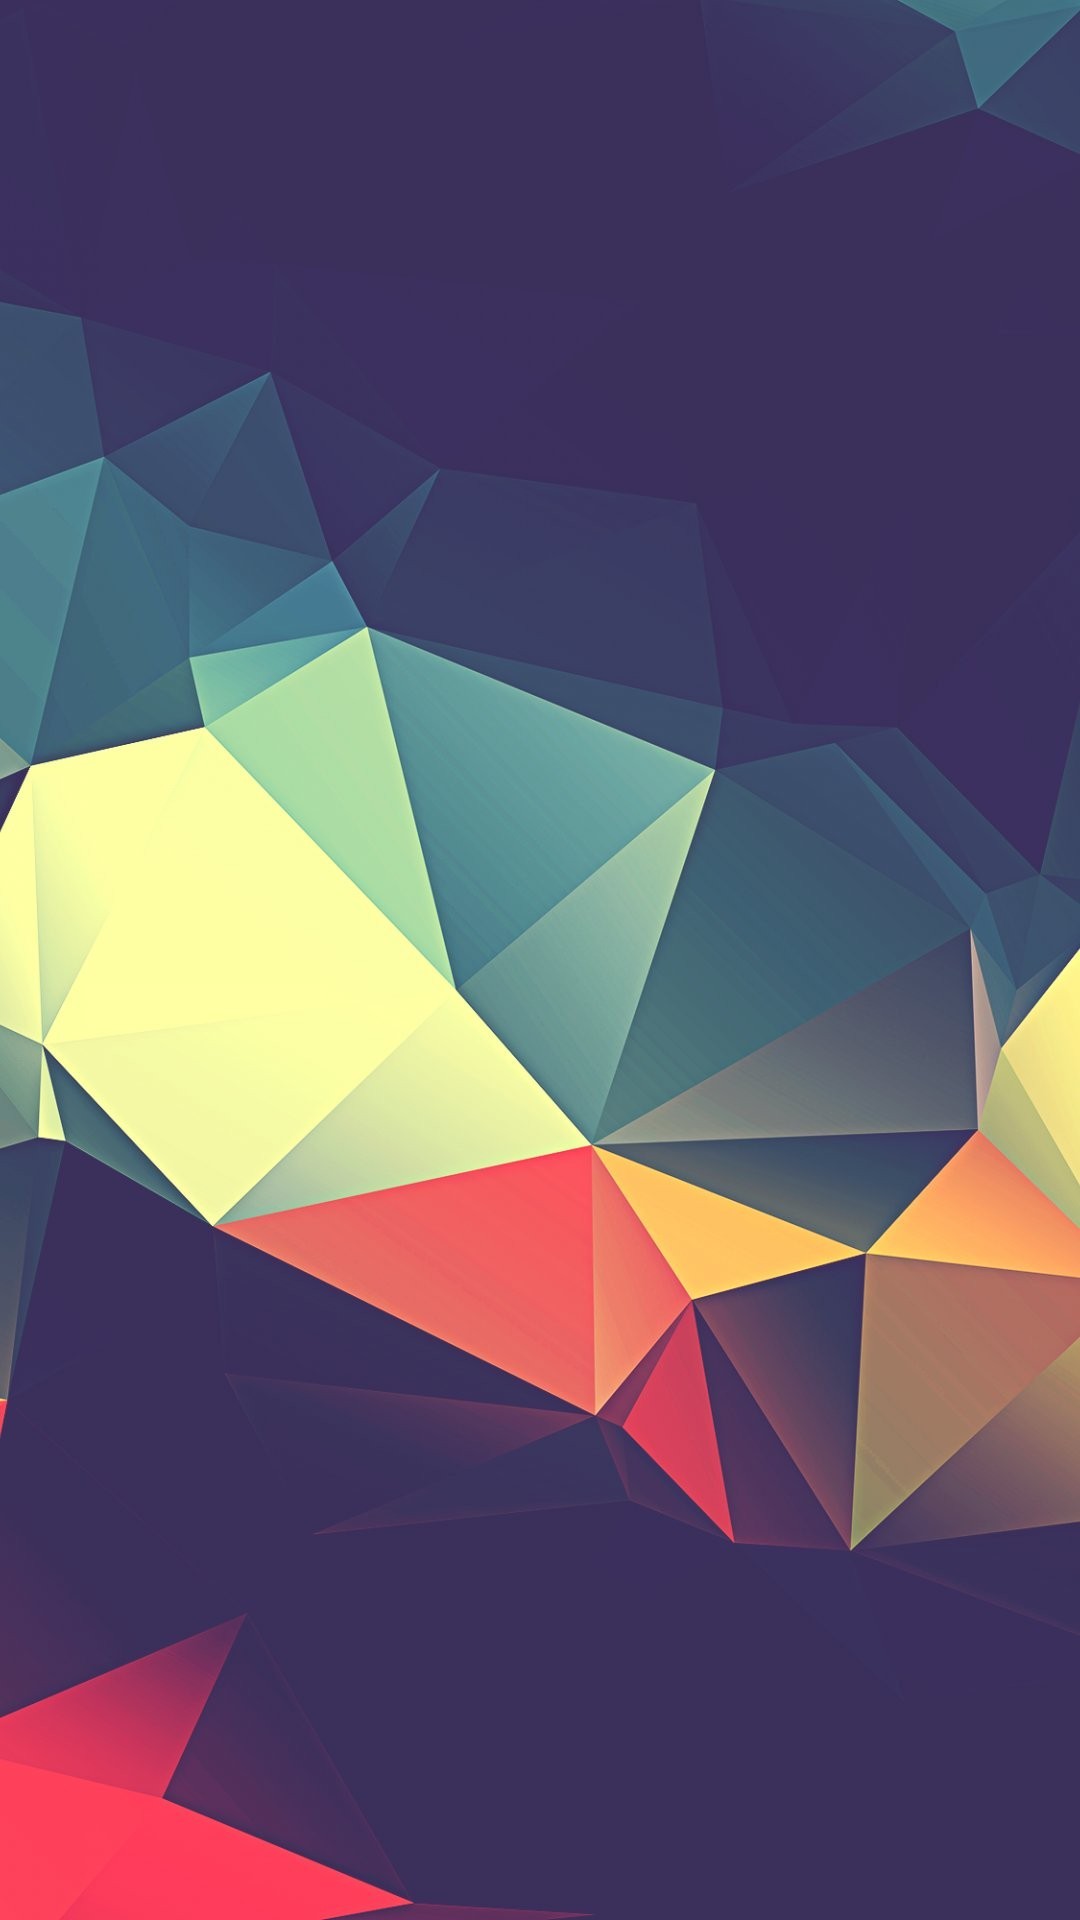 1080x1920 Low Poly iPhone 6 Plus Wallpaper 35941 - Abstract iPhone 6 Plus Wallpapers